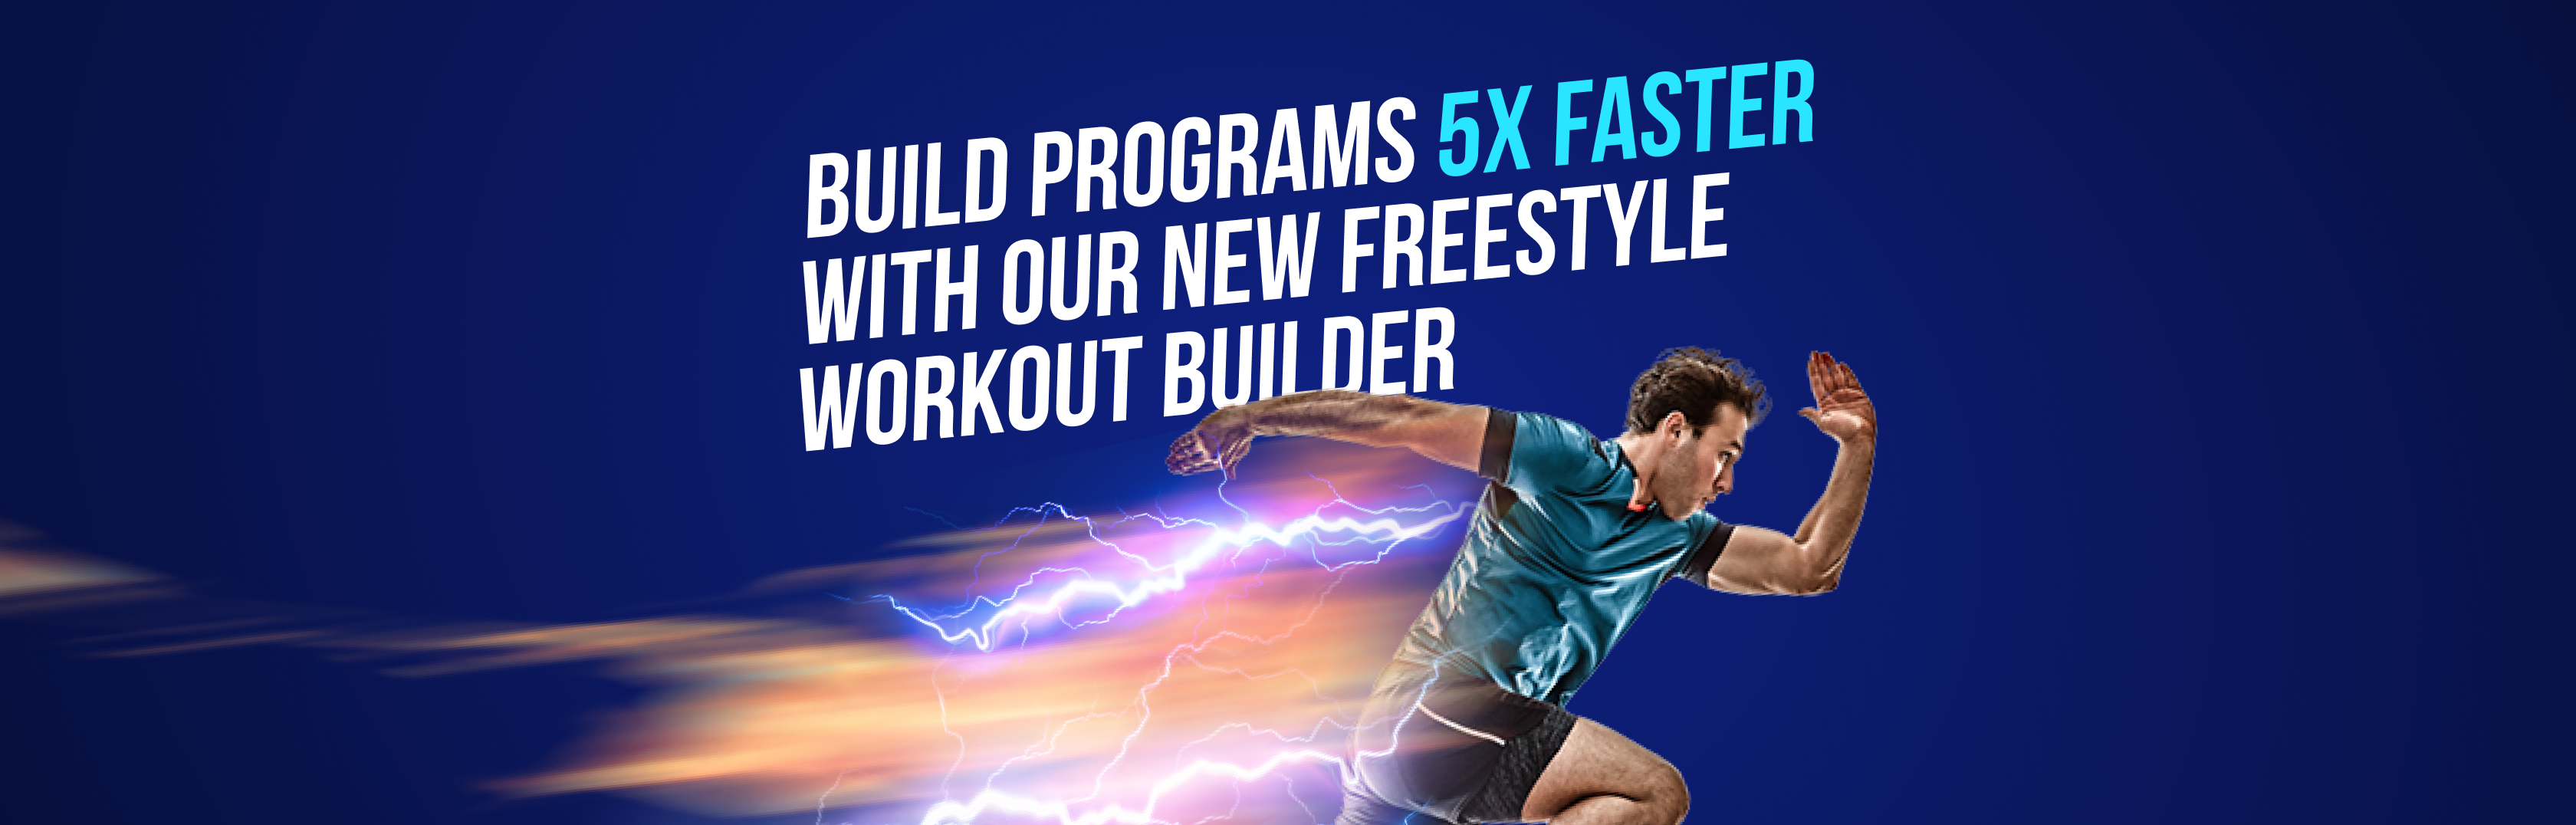 Introducing: Freestyle Workout Builder